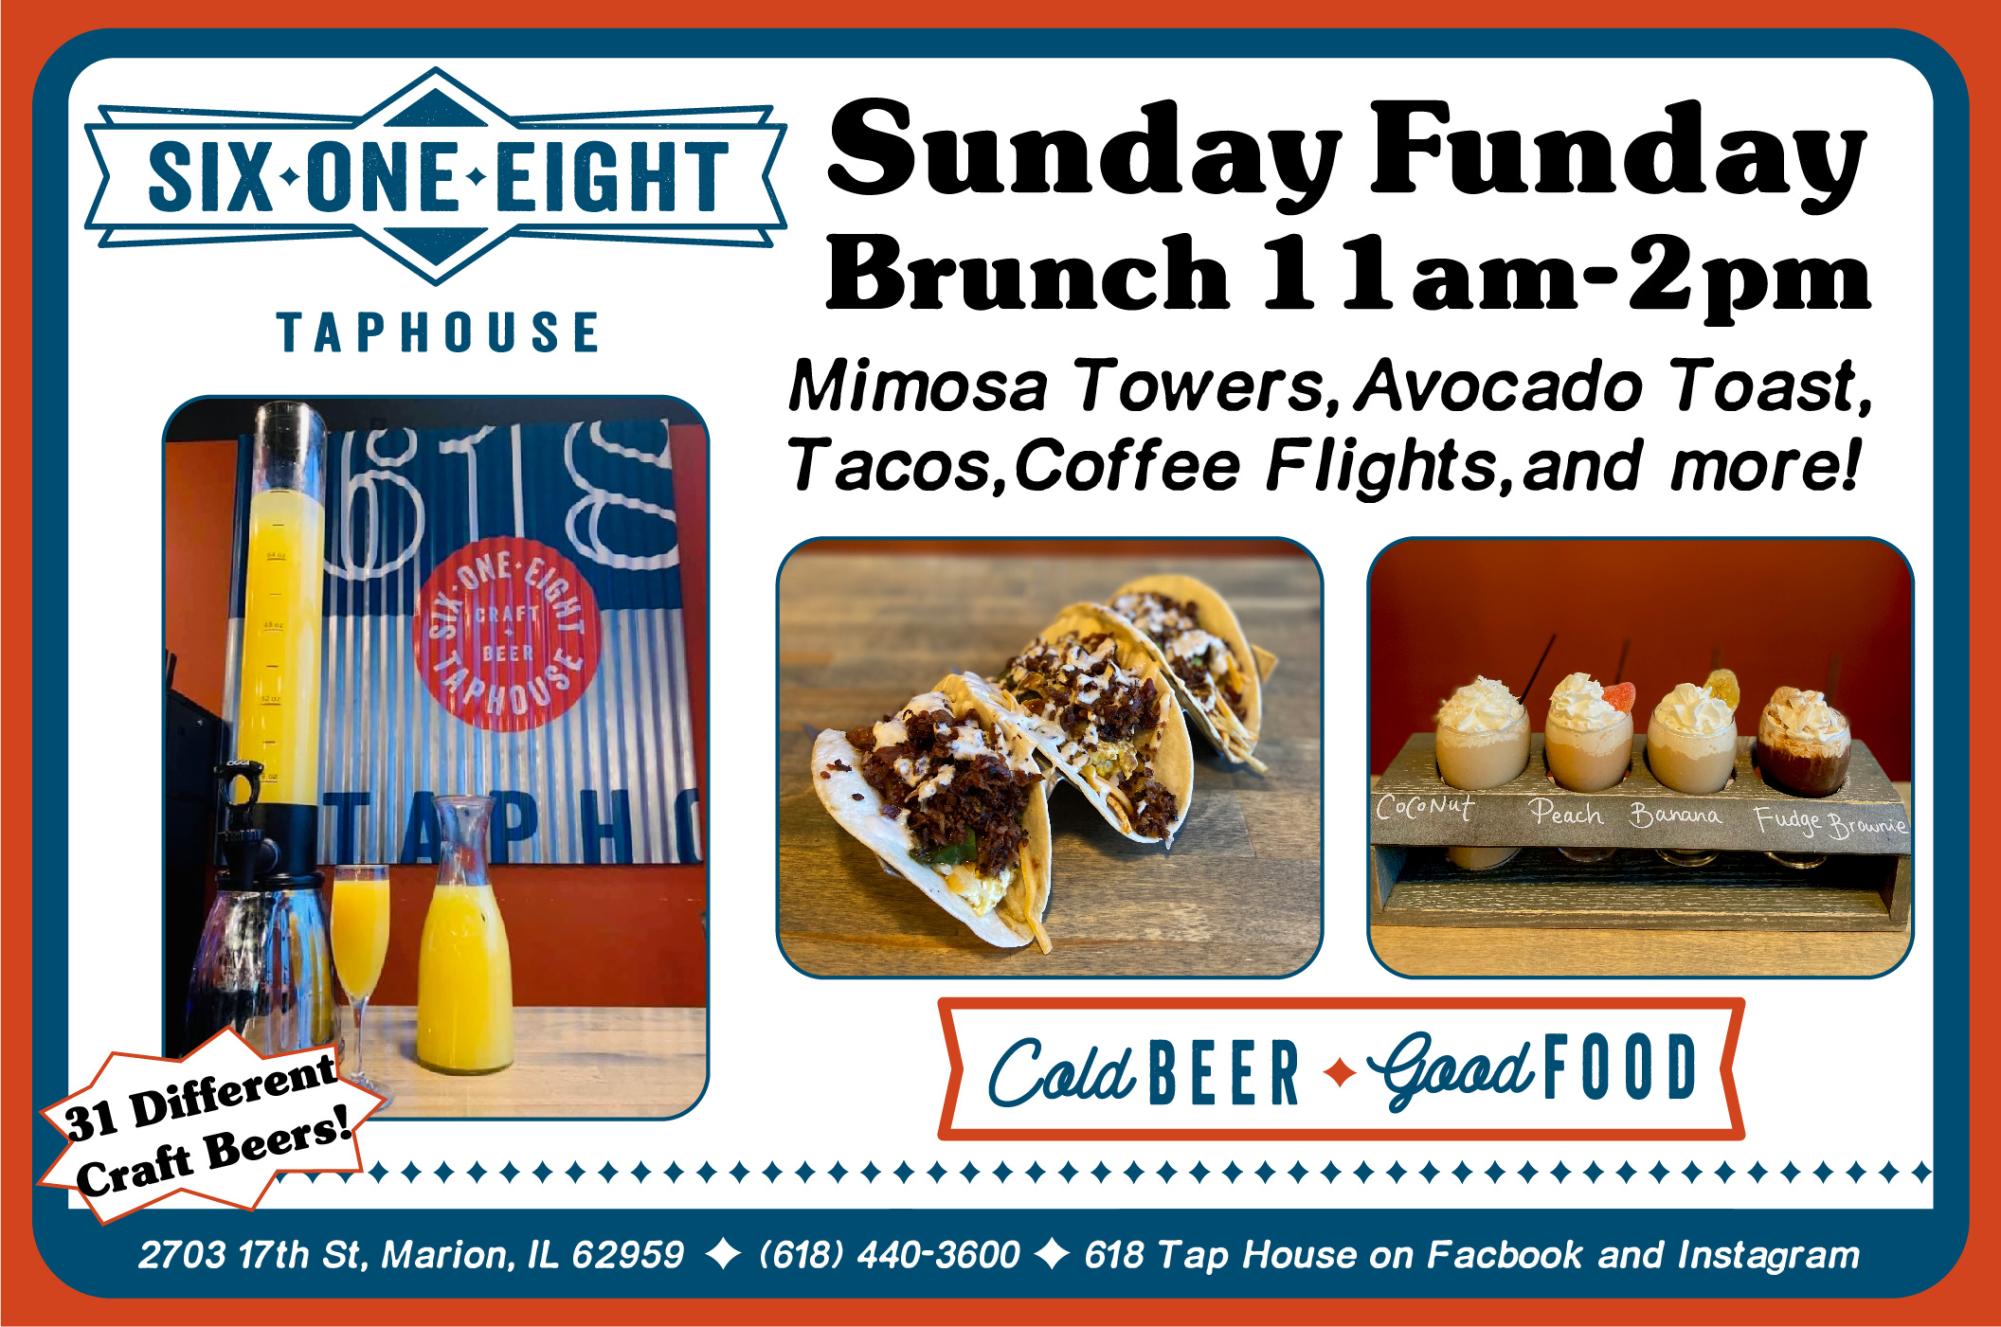 Sunday Funday Brunch 11 a.m.-2 p.m. at 618 Taphouse